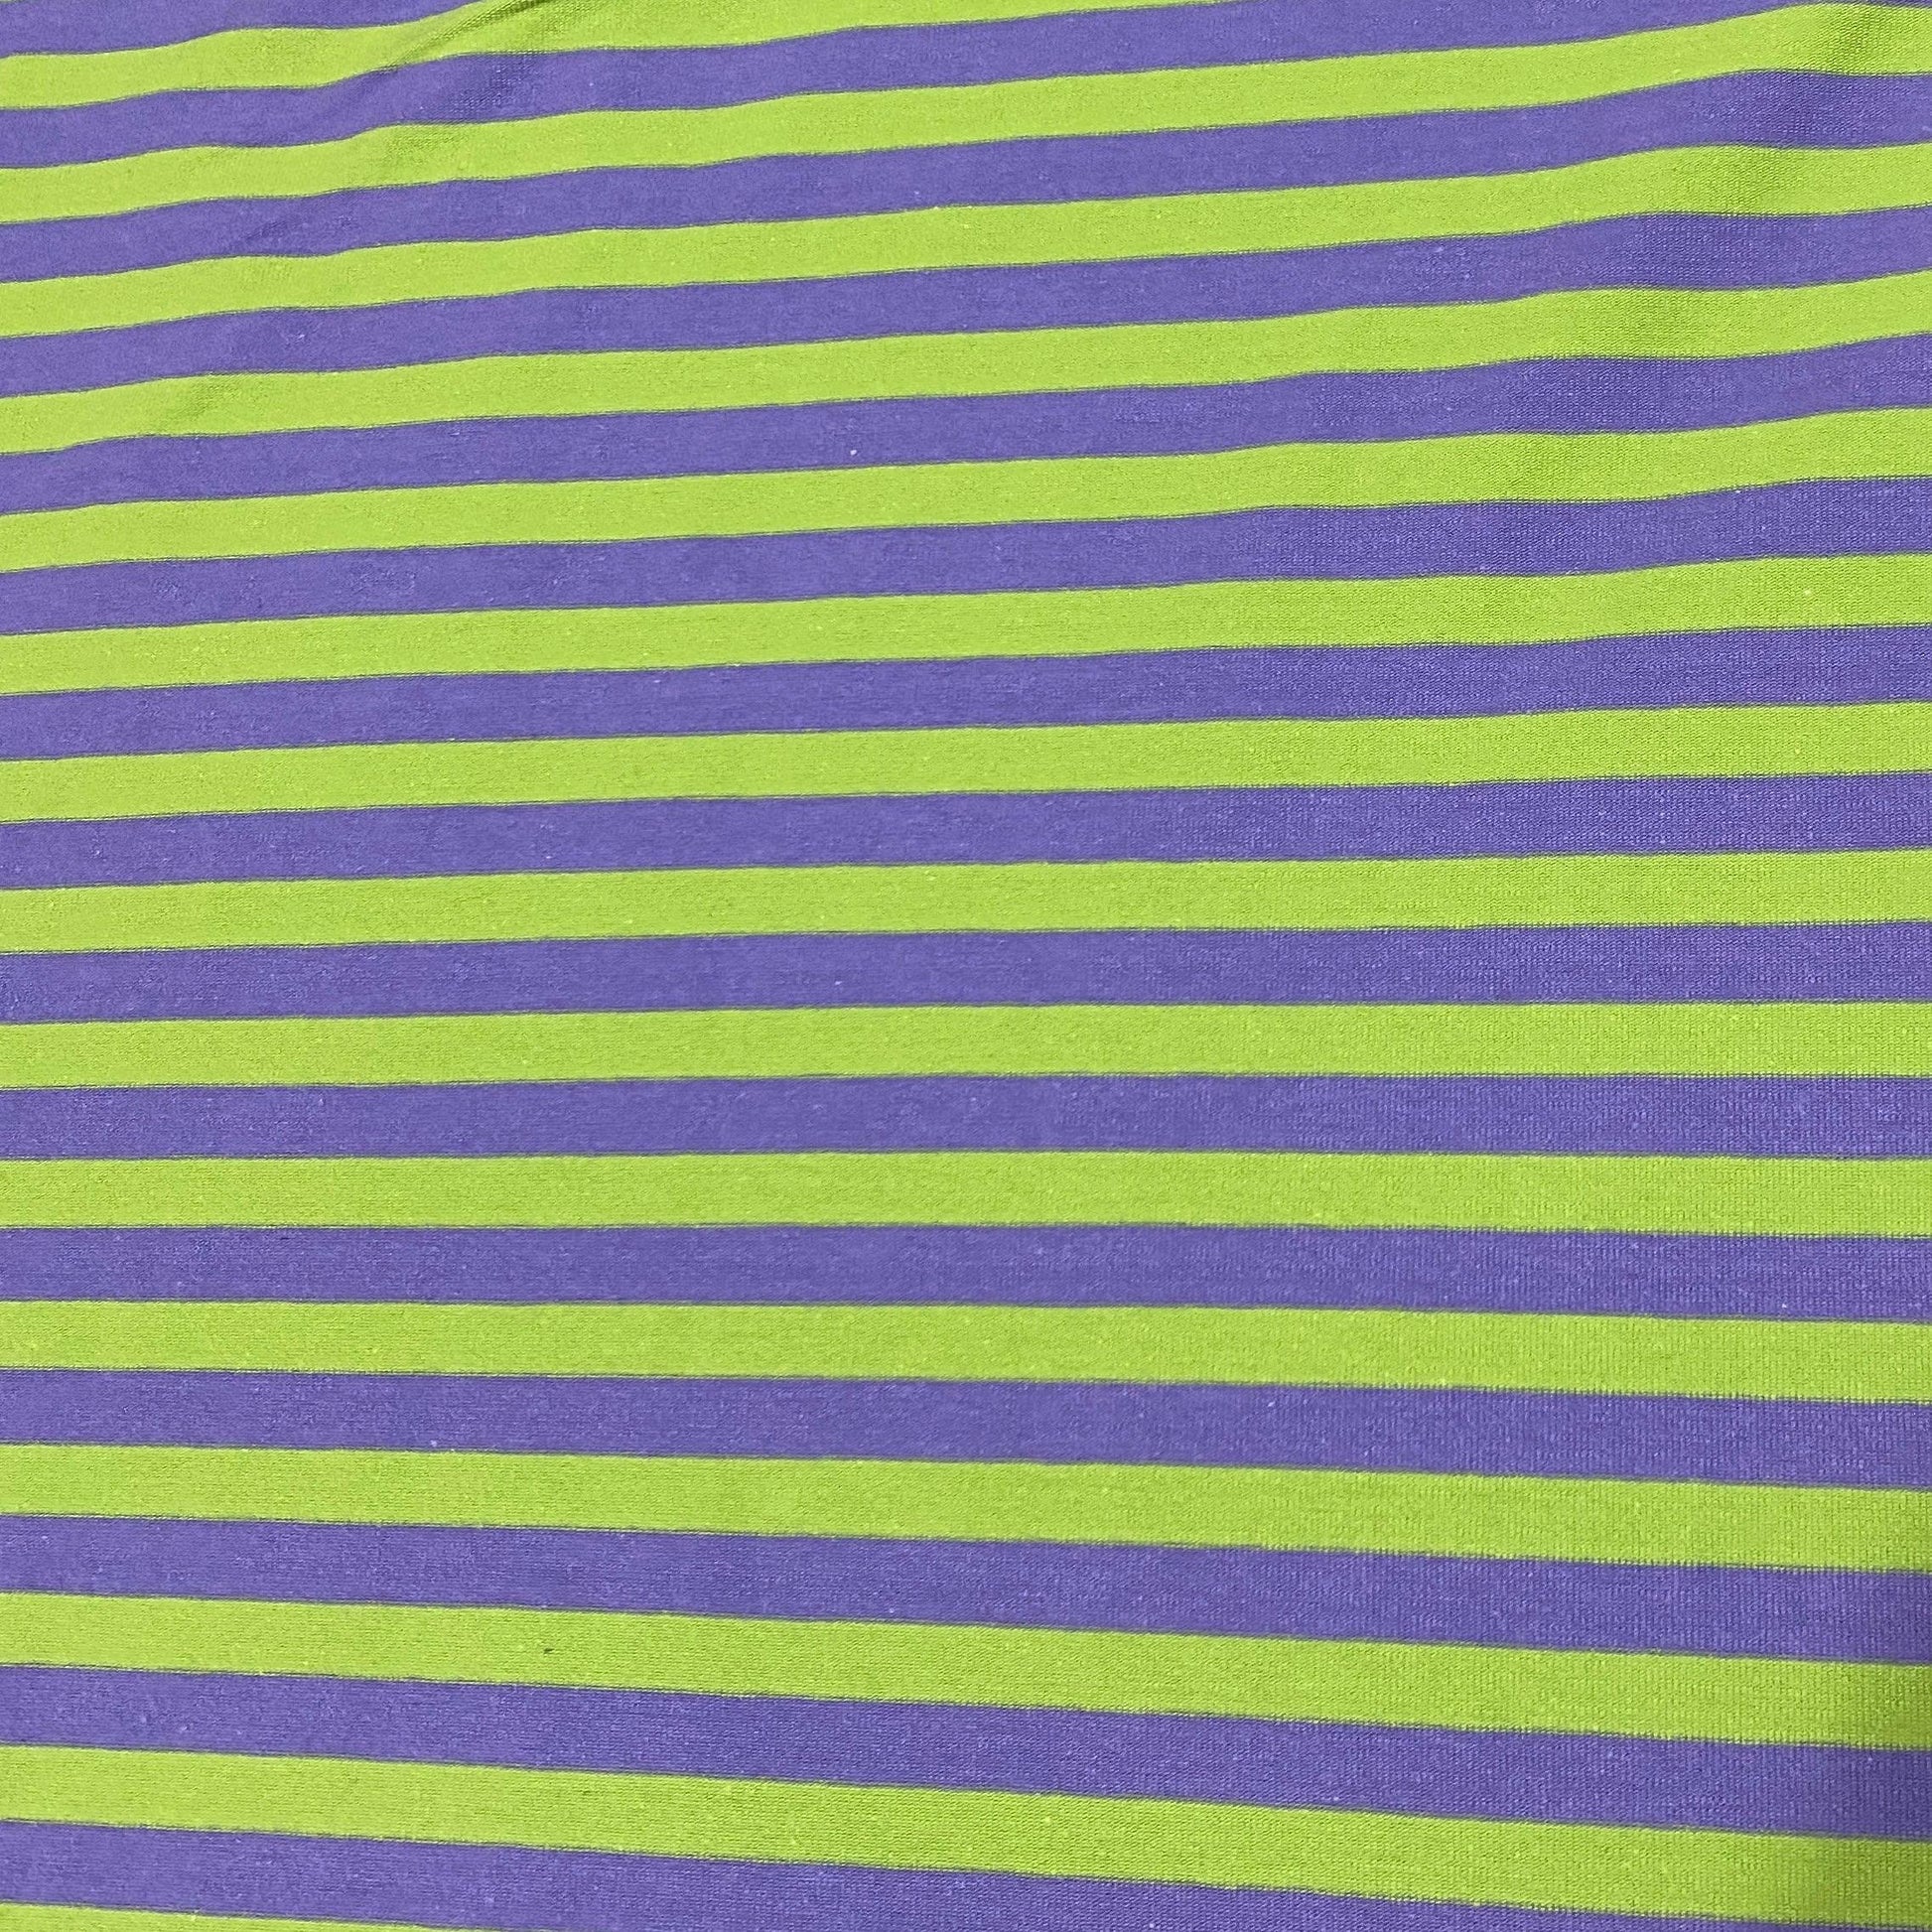 Purple and Lime 3/8" Stripes on Cotton/Spandex Jersey Fabric - Nature's Fabrics